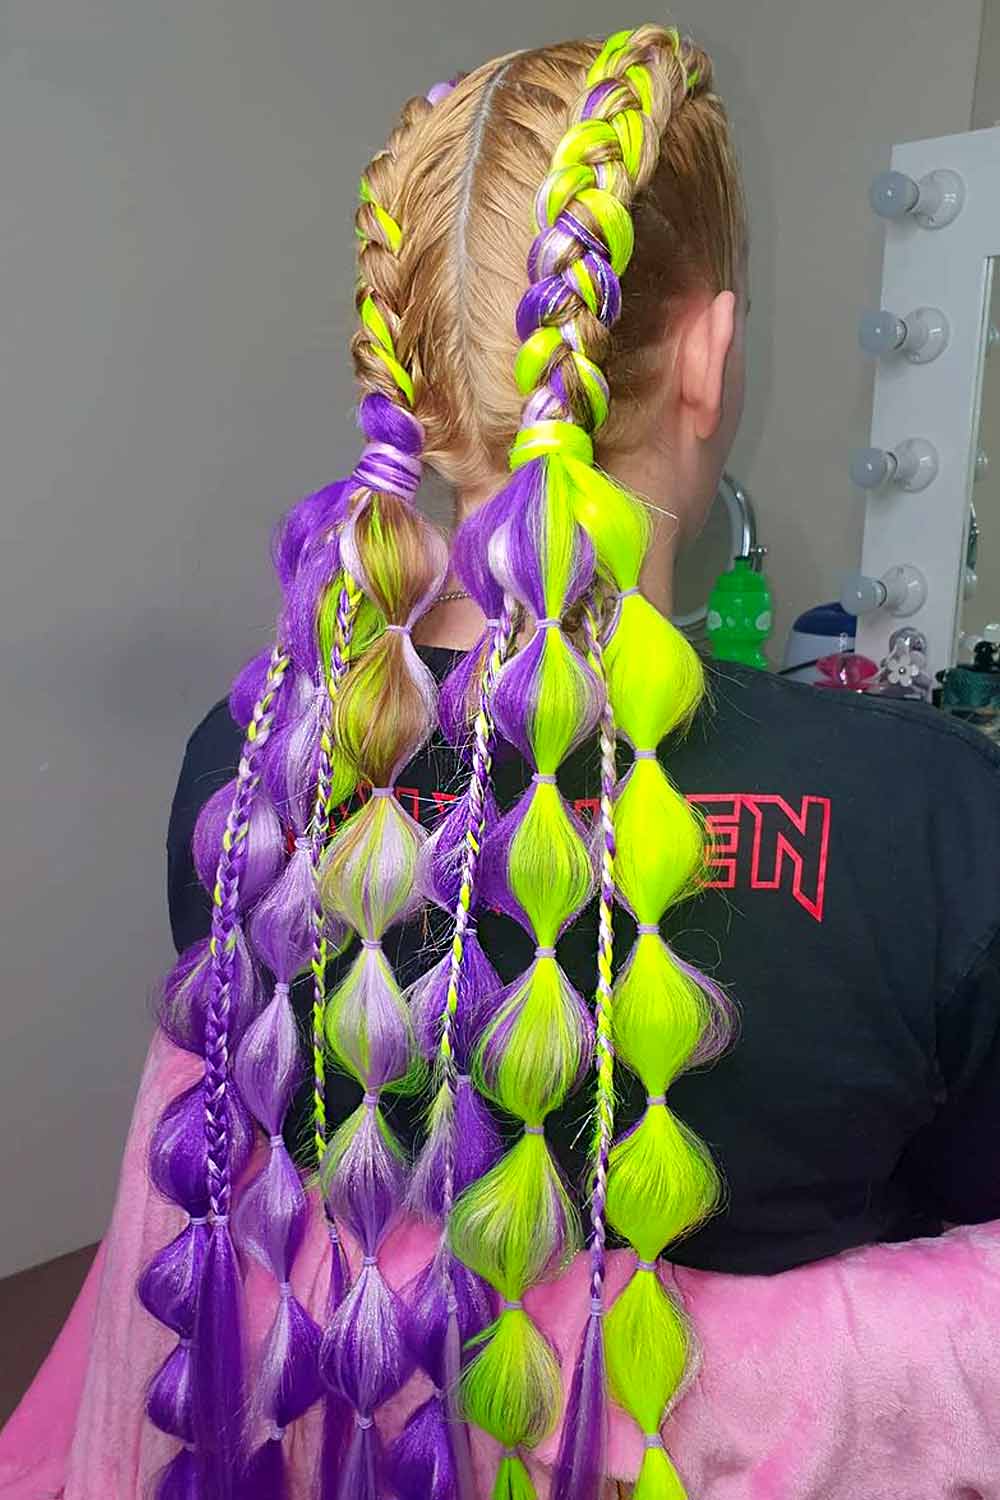 Rubber Band Hairstyles for Bubble Ponytails Purple #rubberbandhairstyles #naturalhairstyles #kidshairstyles